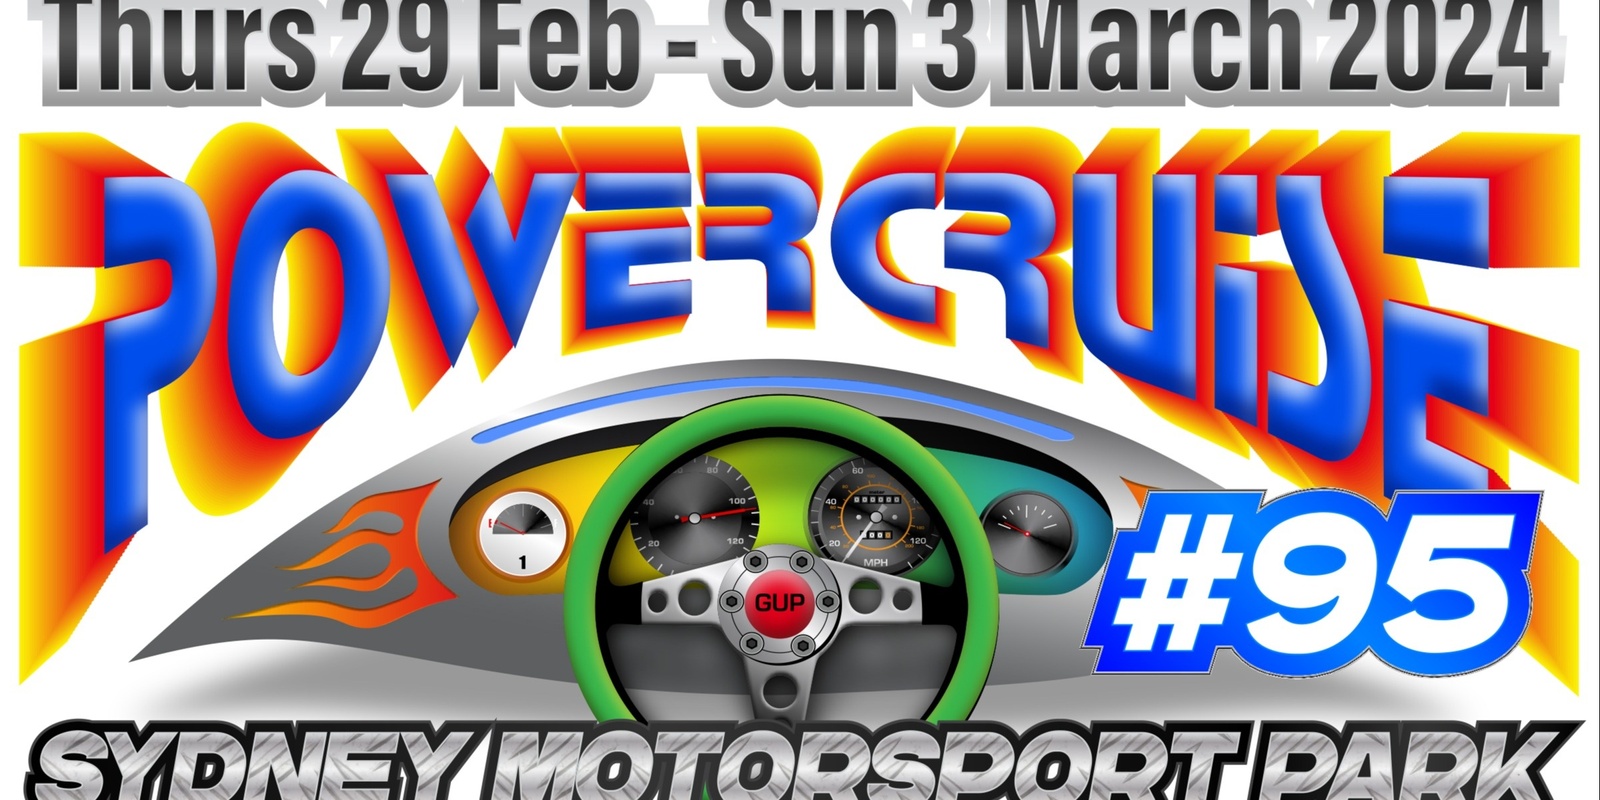 Banner image for Powercruise #95, 29th Feb - 3rd March Sydney Motorsports Park